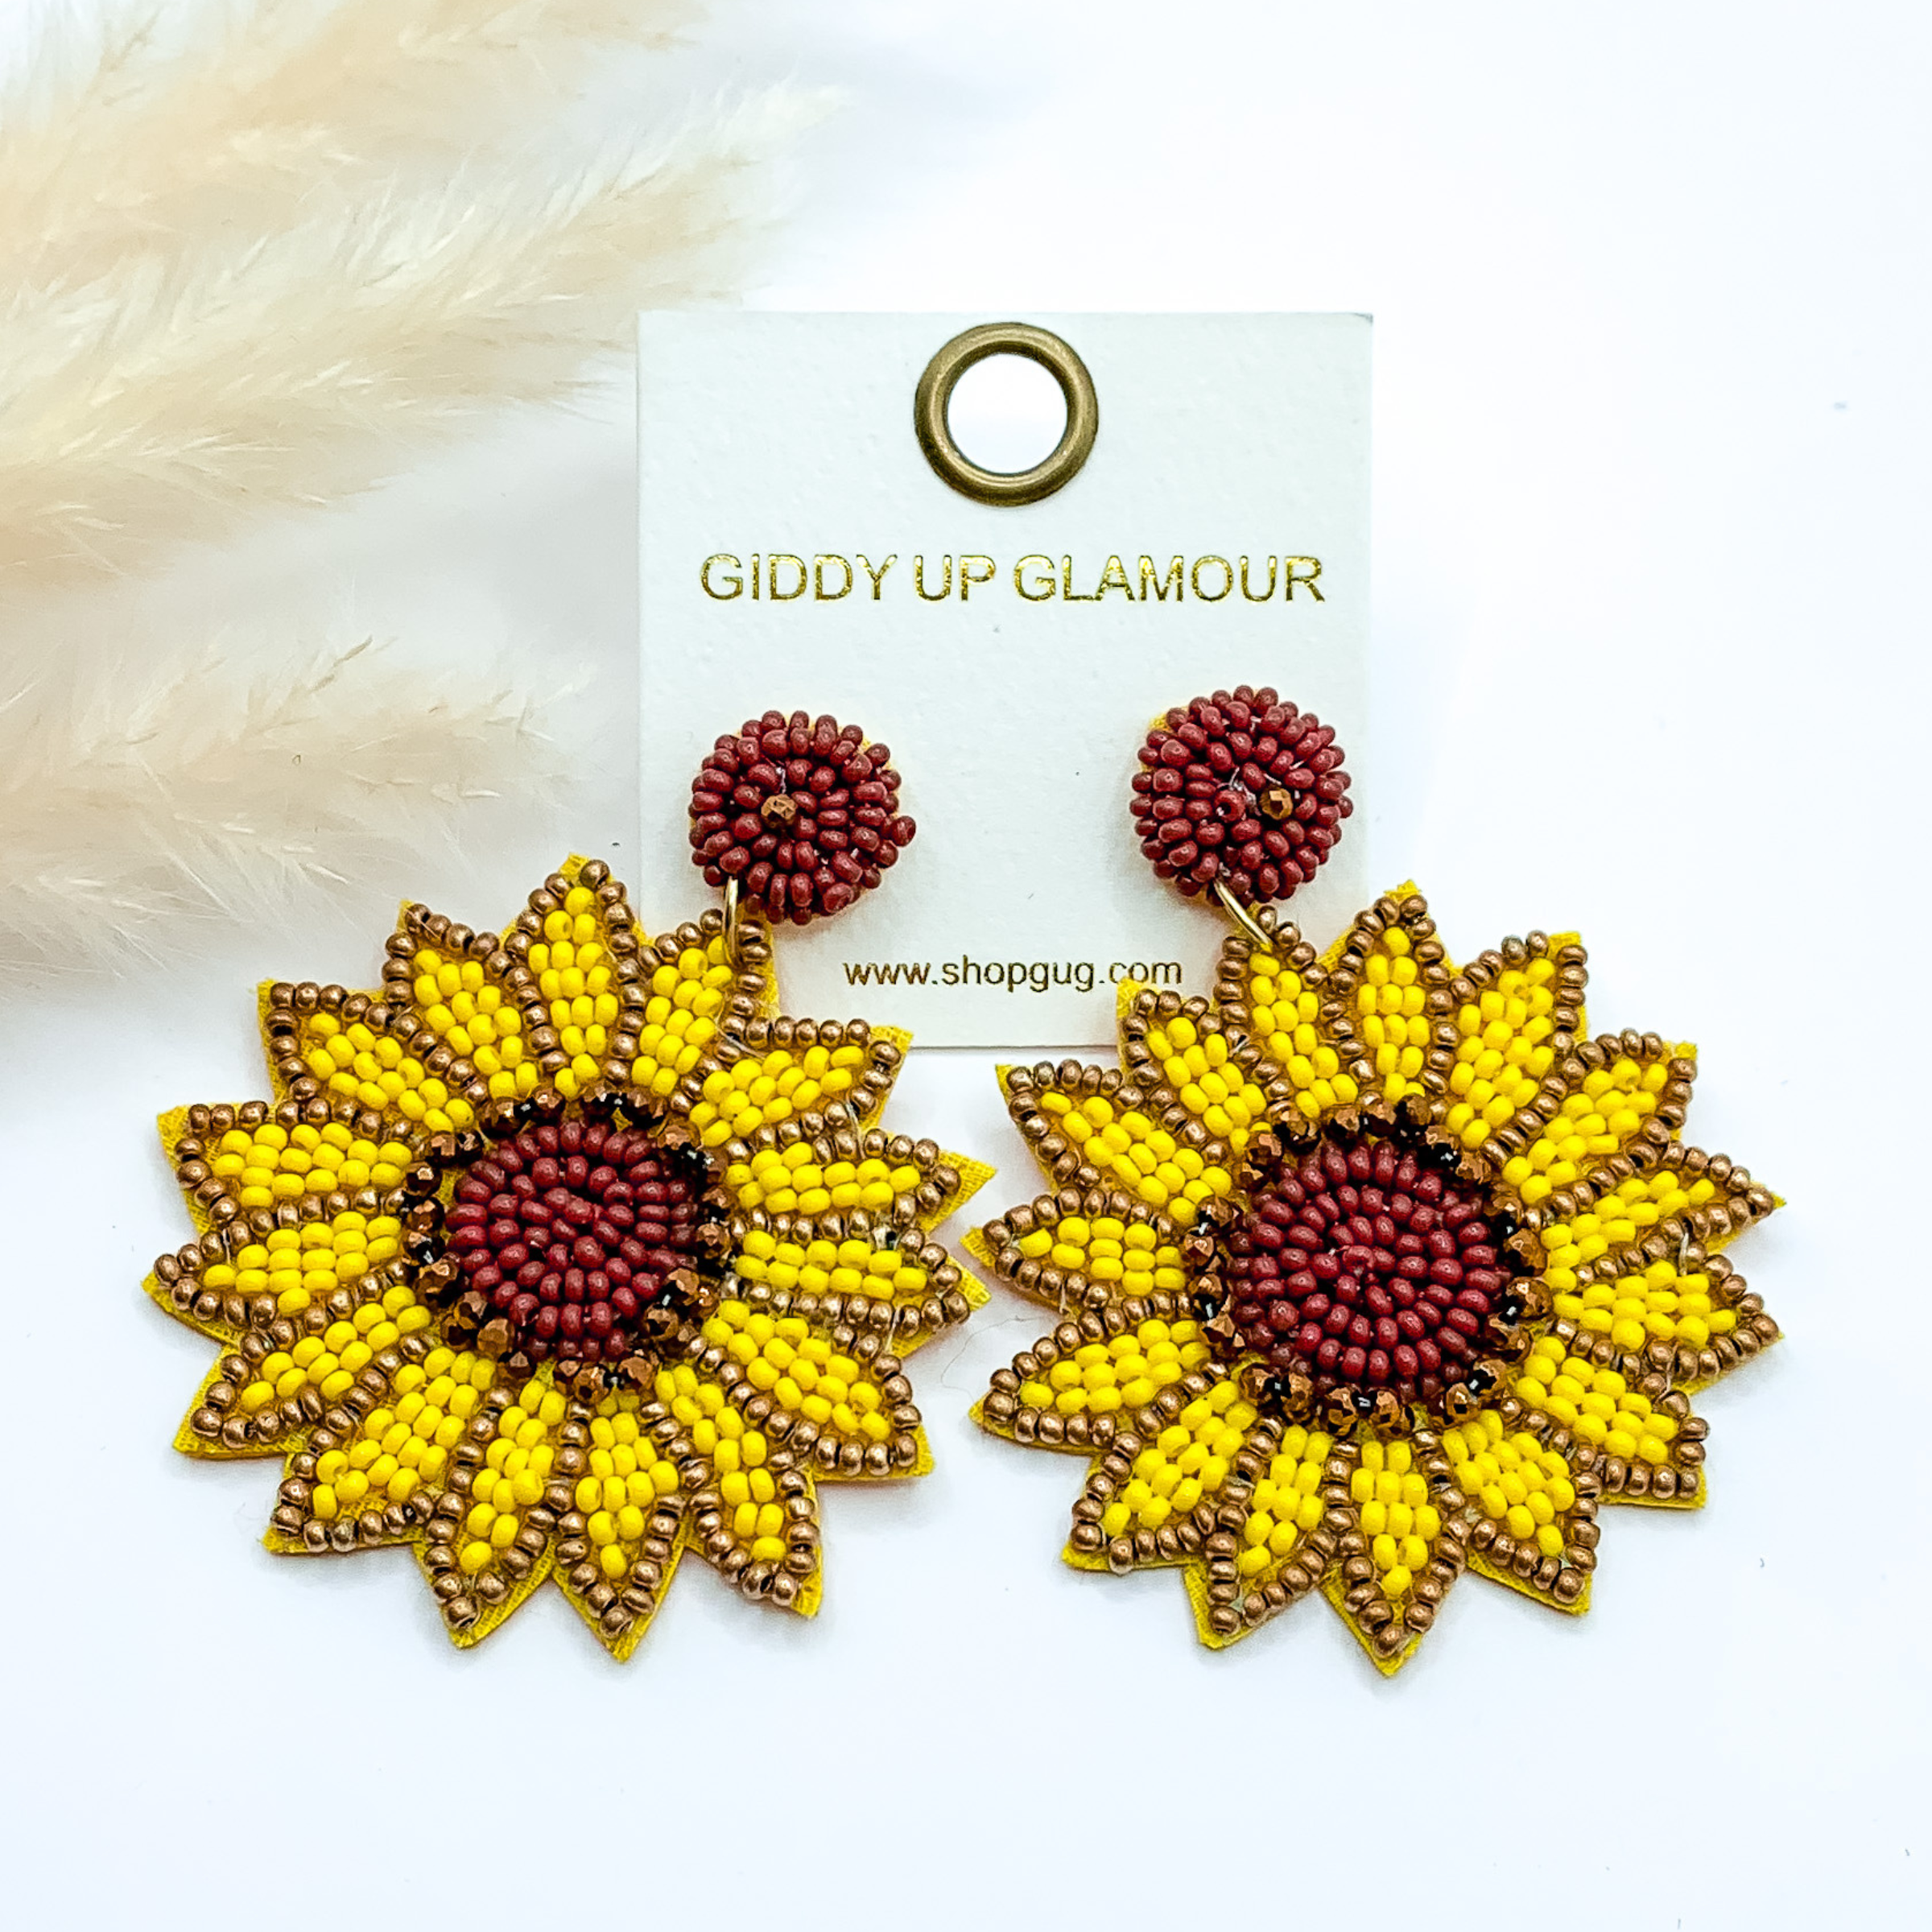 Beaded sunflower drop earrings. These earrings include yellow, gold, and brown beads. These earrings are pictured on a white background. 